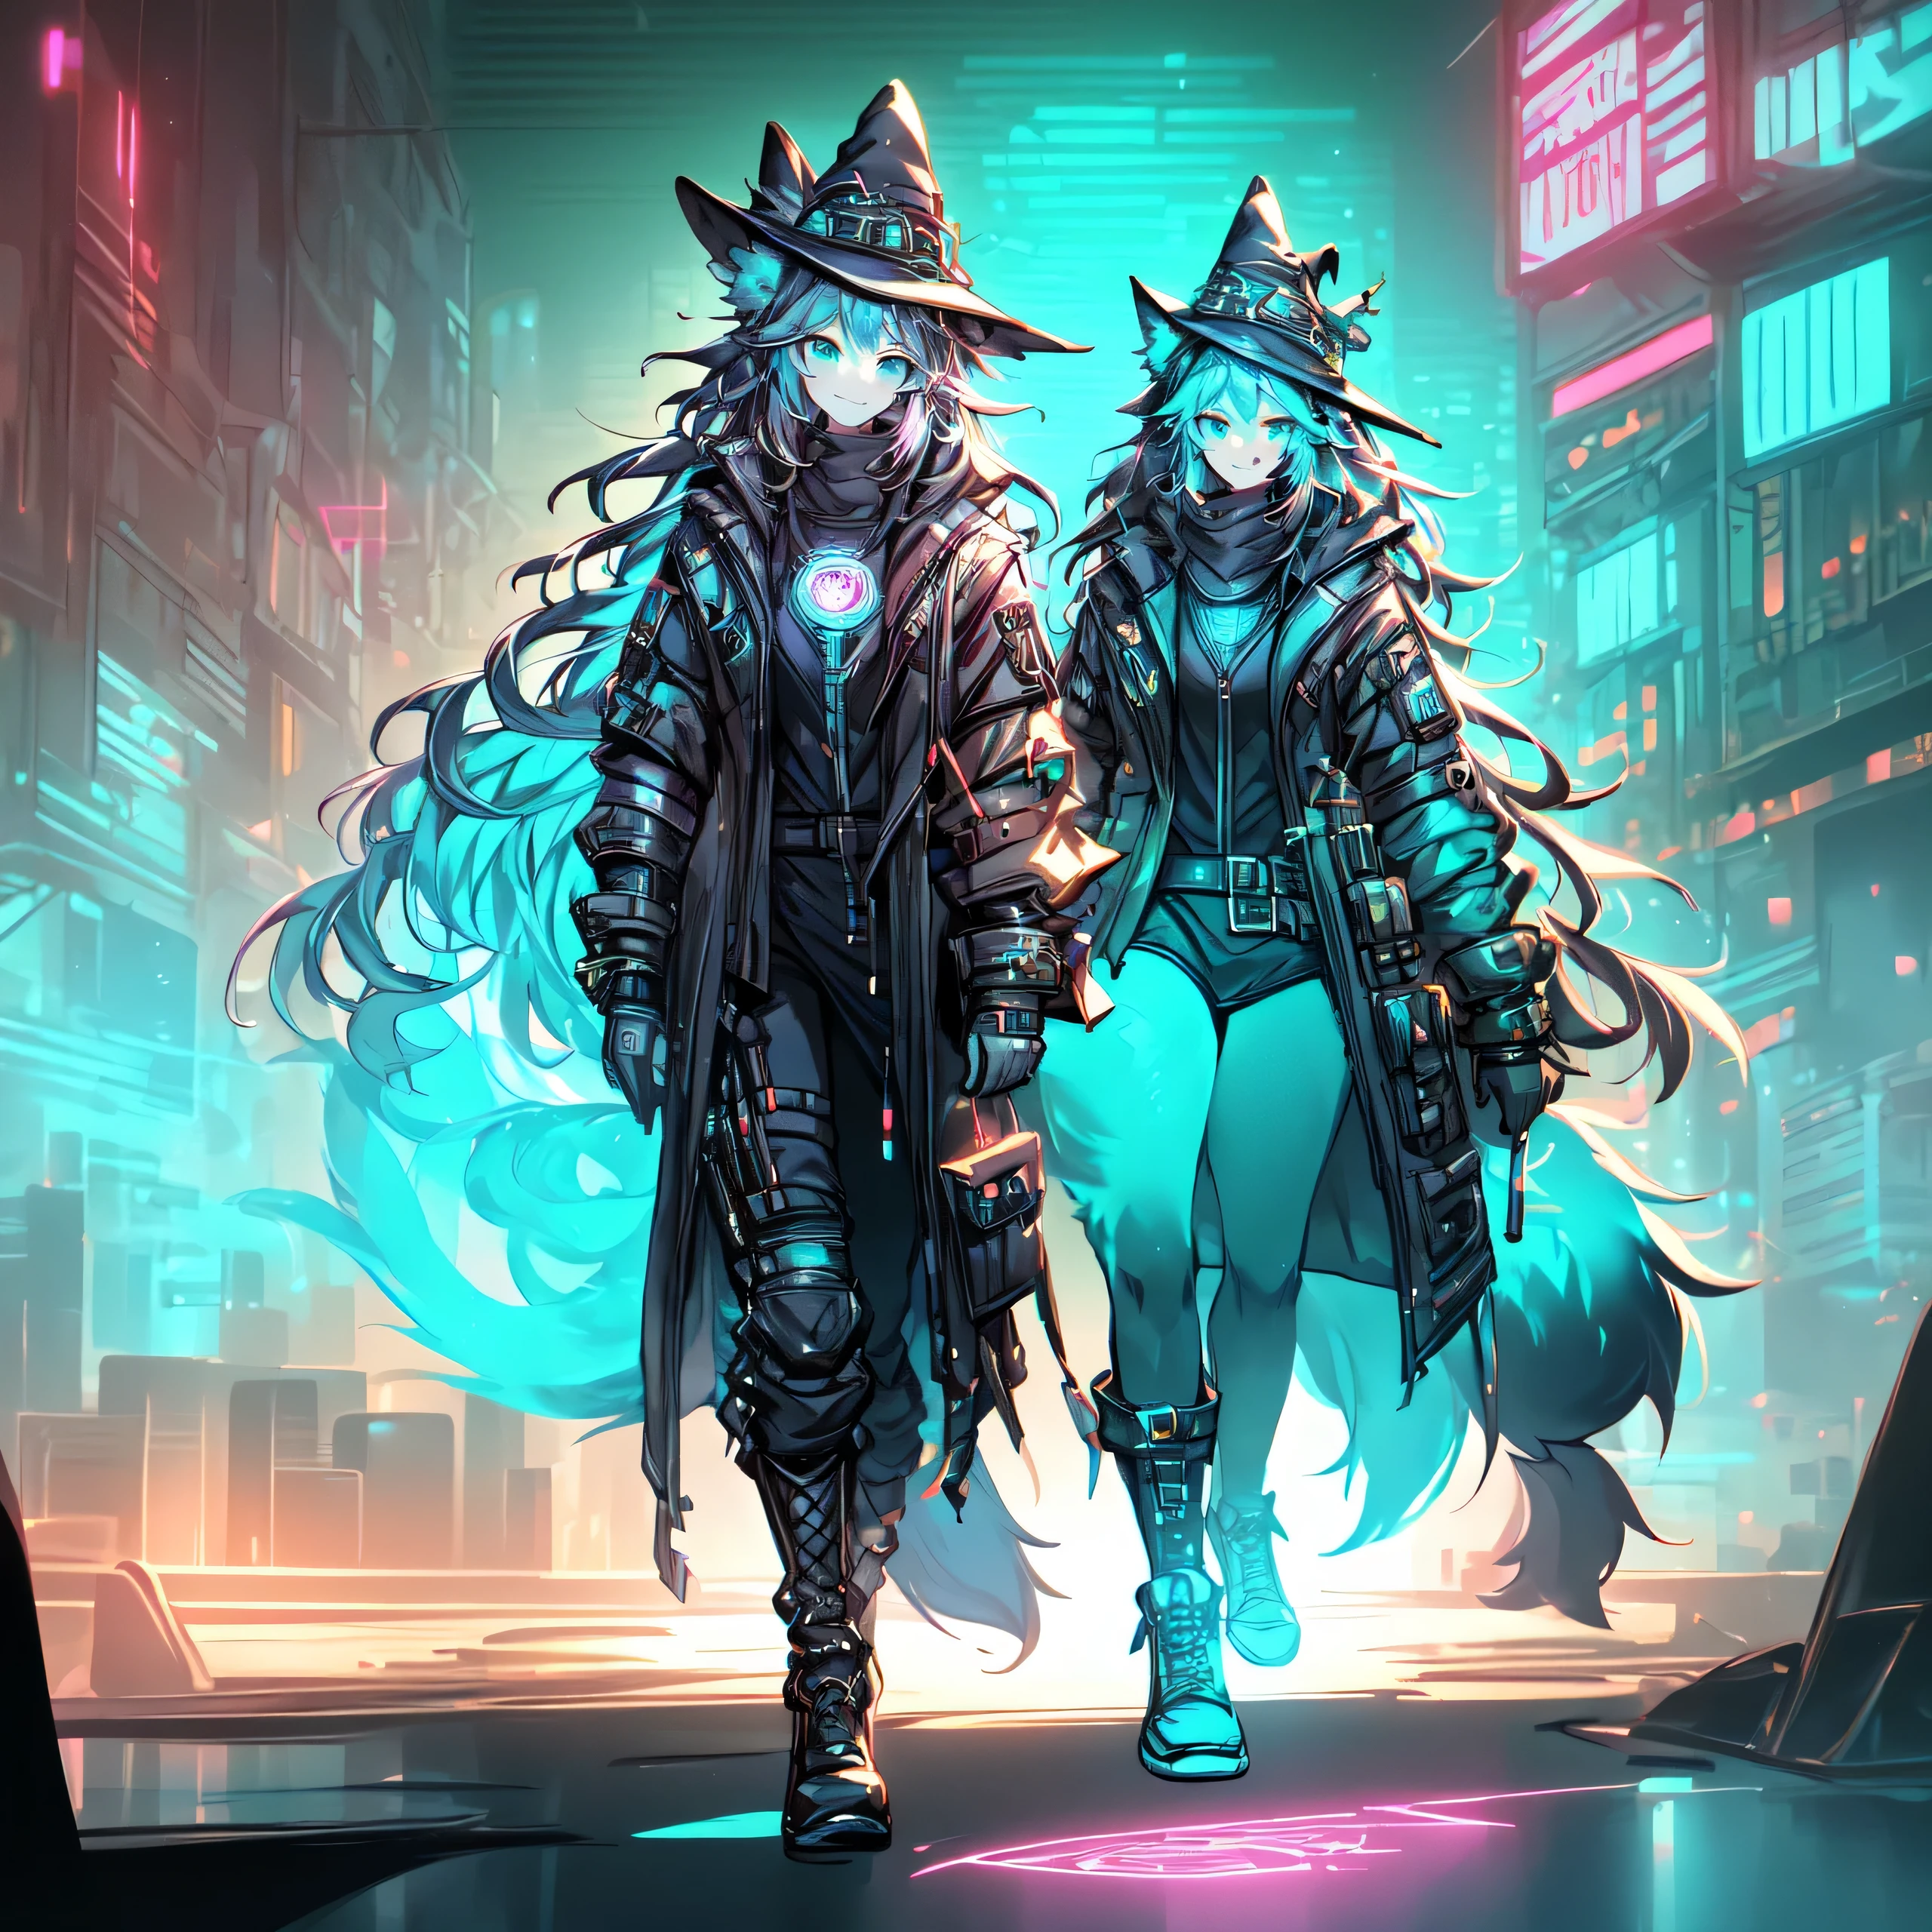 [best quality, shaded, extreme detail, highly detailed, ultra detailed, intricate, realistic], woman, hairy woman, wolf woman, full body portrait, full fur, magic fur, full tail, big tail, magic tail, long hair ( colored hair), hat on the head (cyberpunk style witch hat), almond-shaped eyes (bright turquoise color), expressive smile, charming face, witch outfit (dark color with magic runes, outfit is cyberpunk style), tights black, shoes (high cyberpunk boots), cyberpunk city, the scene takes place in a commercial street. The street contains cyberpunk skyscrapers